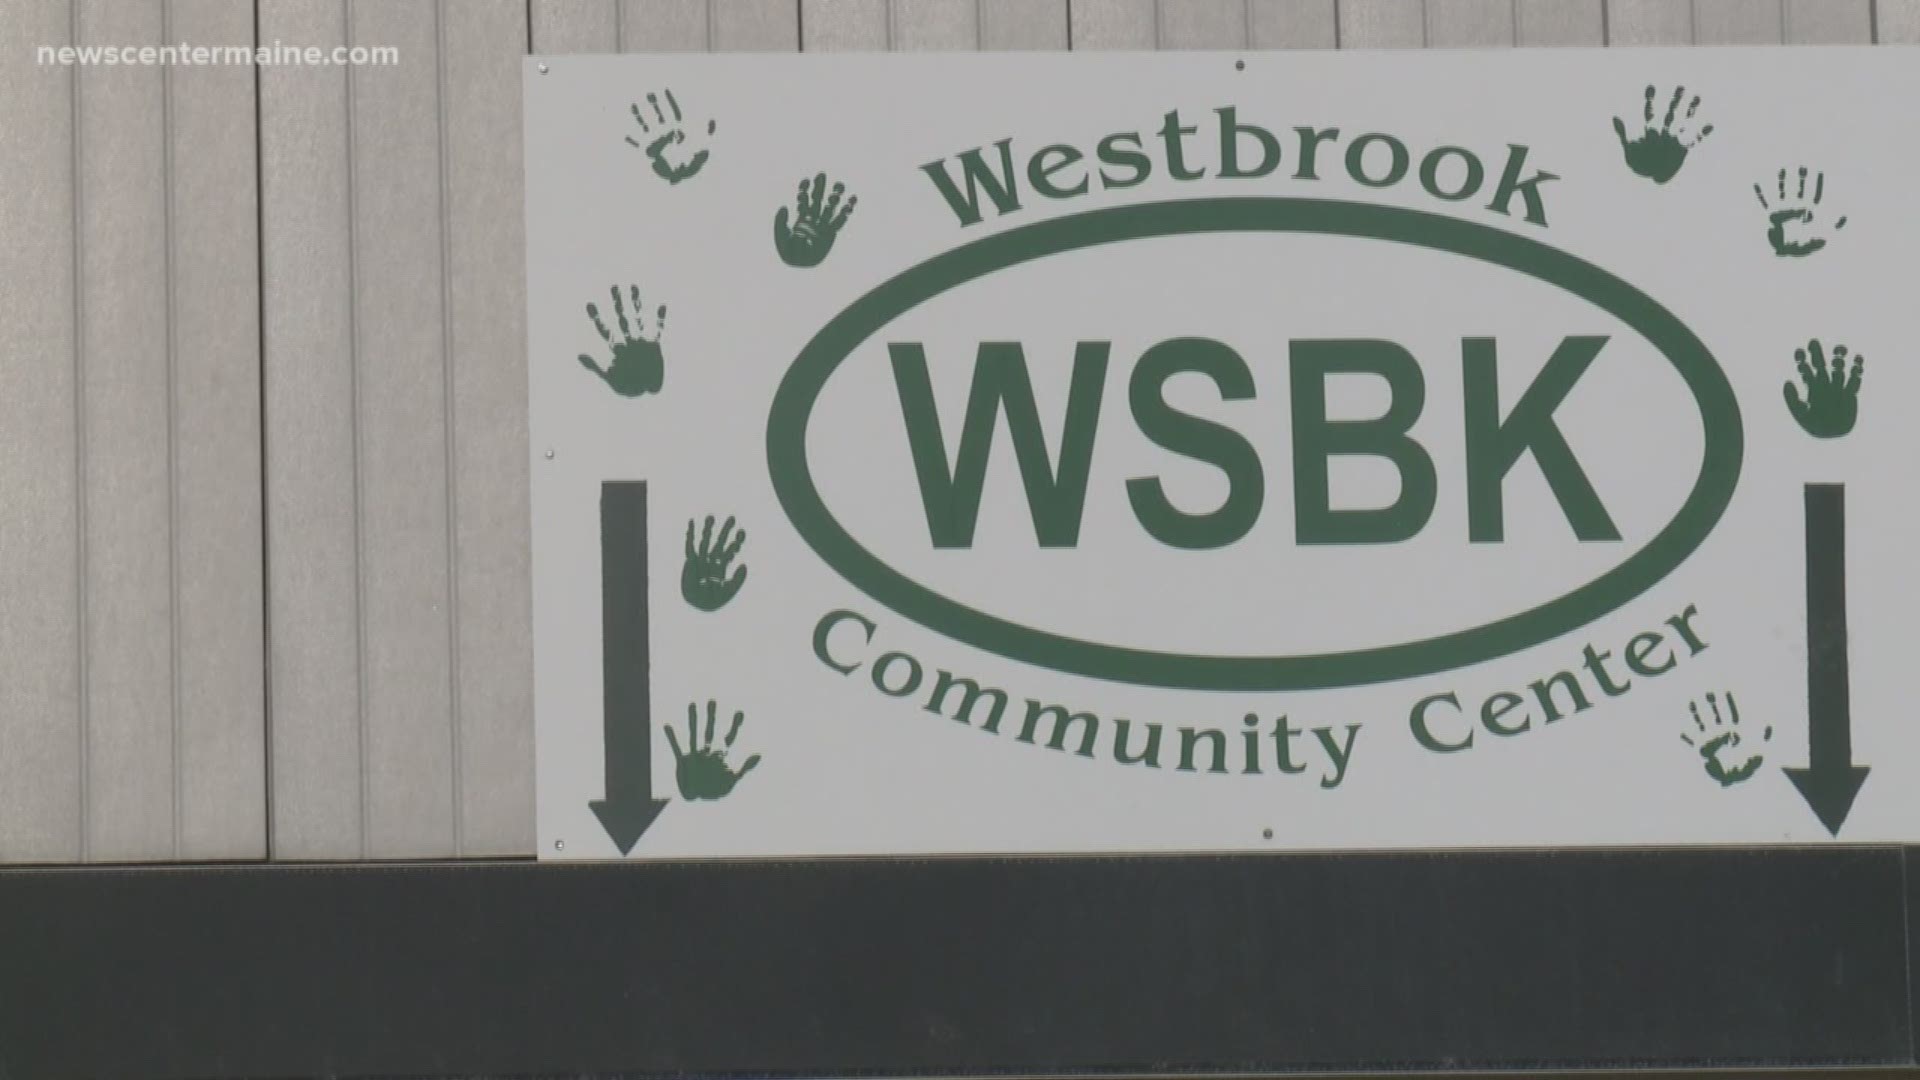 The City of Westbrook is scrambling to find homes for a handful of vital services that have been affected by a fire at the City's Community Center.